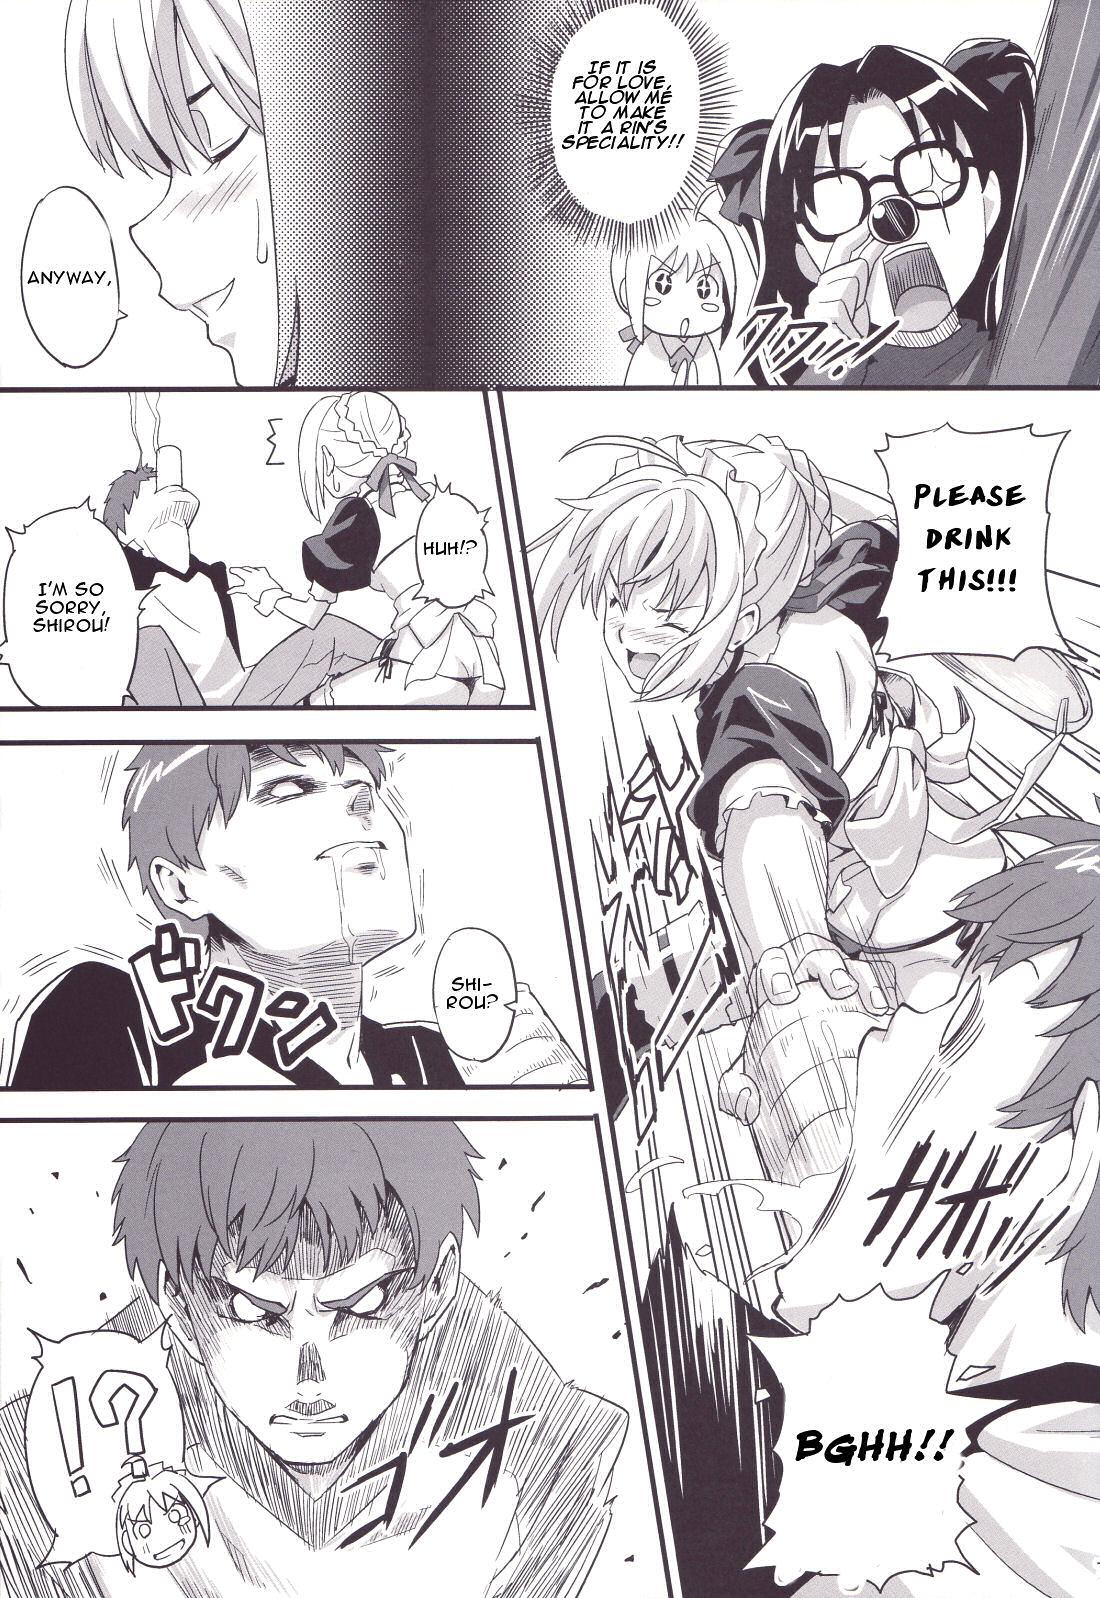 Hardcore Rough Sex Outama King of Soul - Fate stay night Ass Worship - Page 6